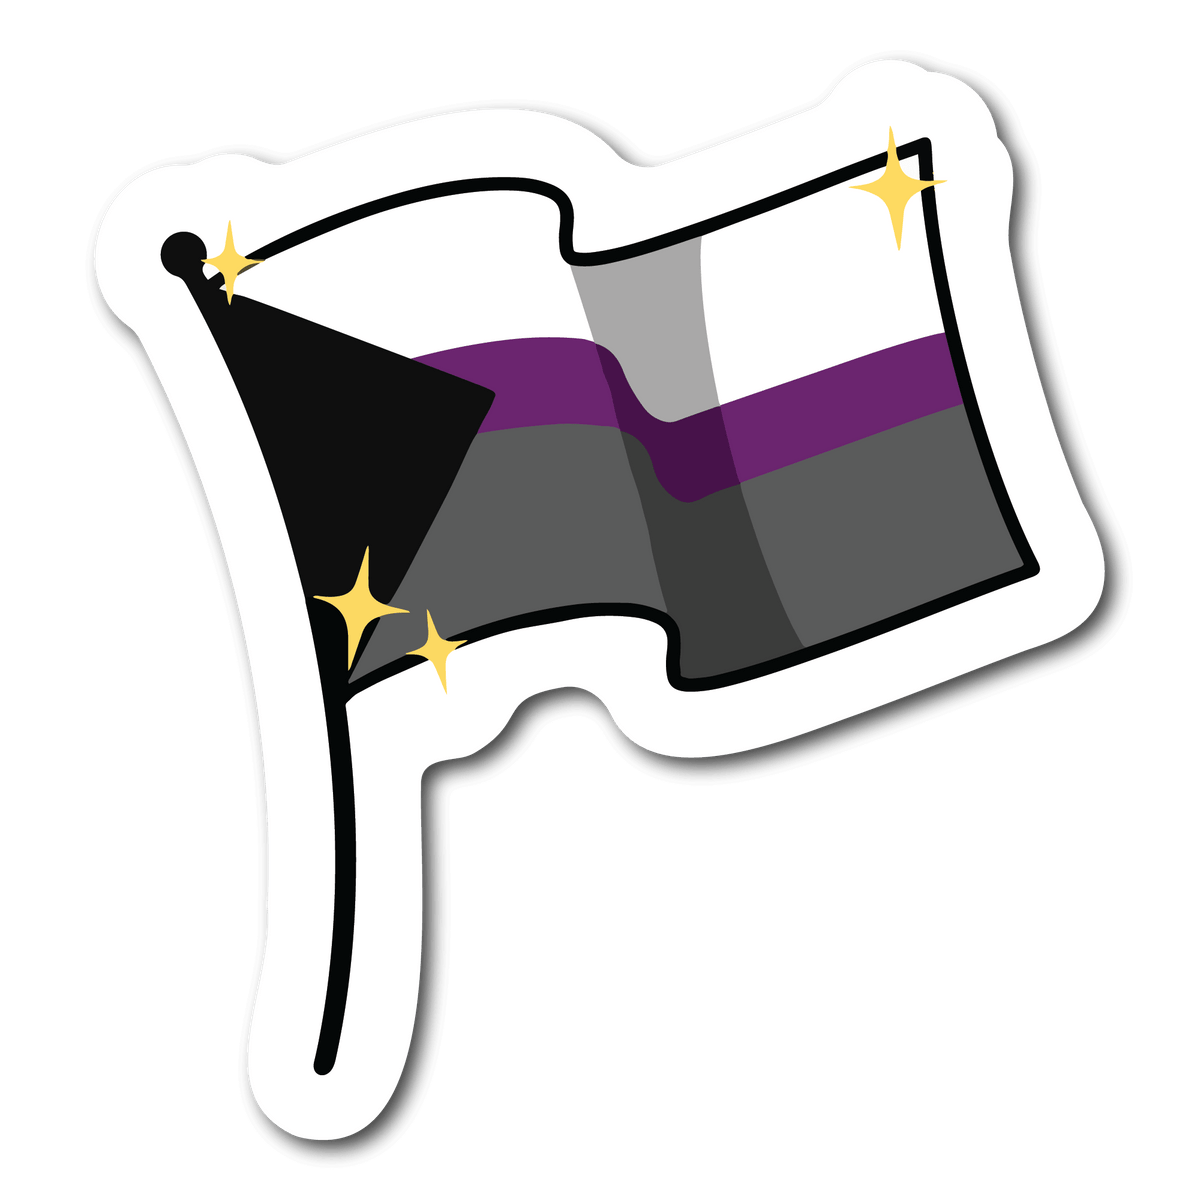 Small Demisexual Pride Flag Waterproof Sticker for LGBTQ Name Tags